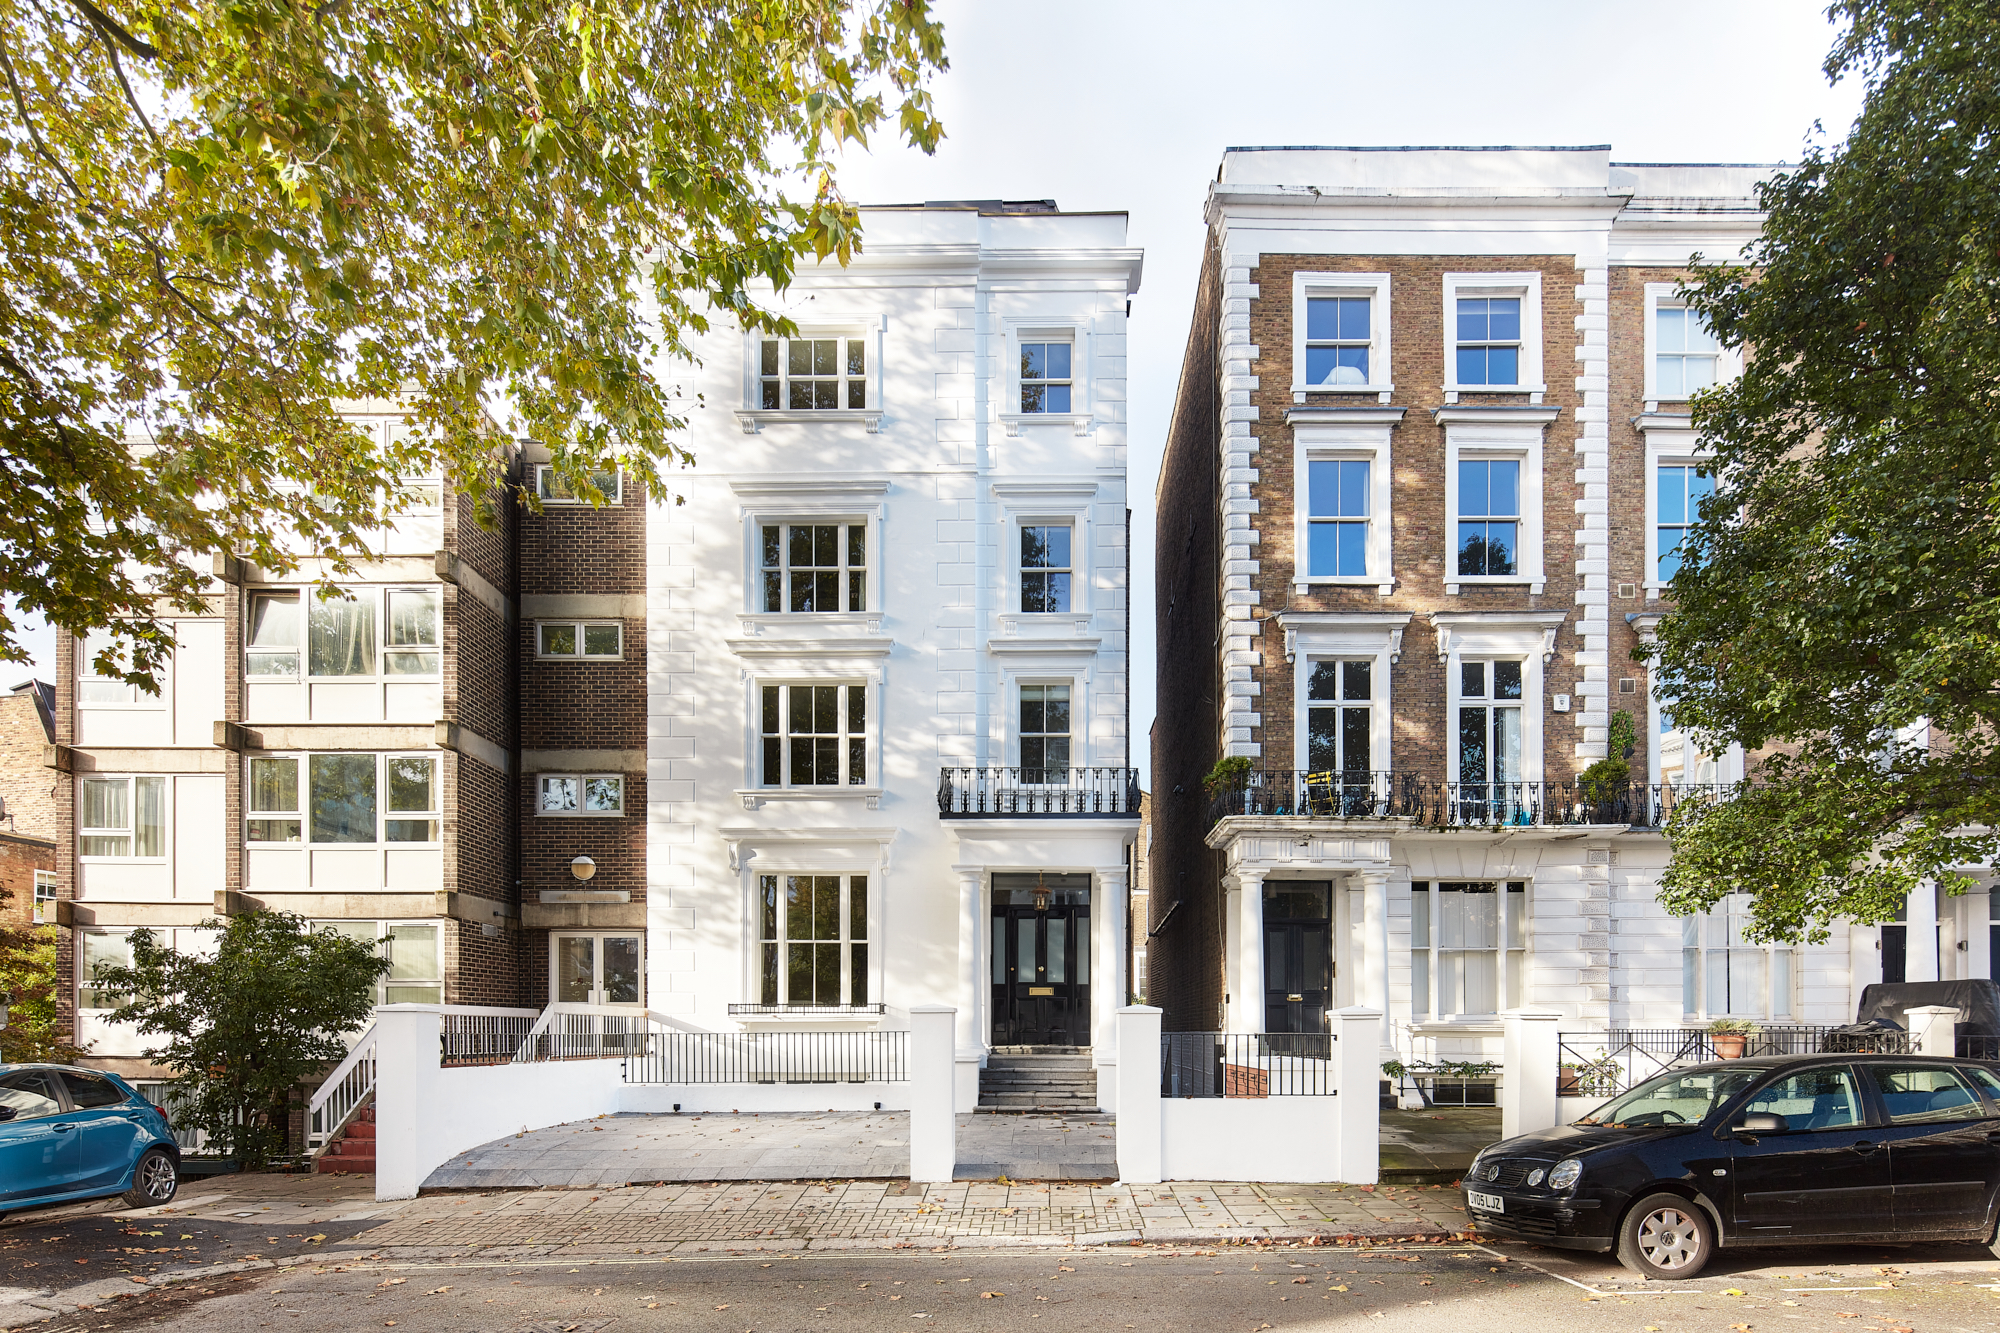 Handsome period exterior of a three-bedroom duplex apartment for sale in Notting Hill